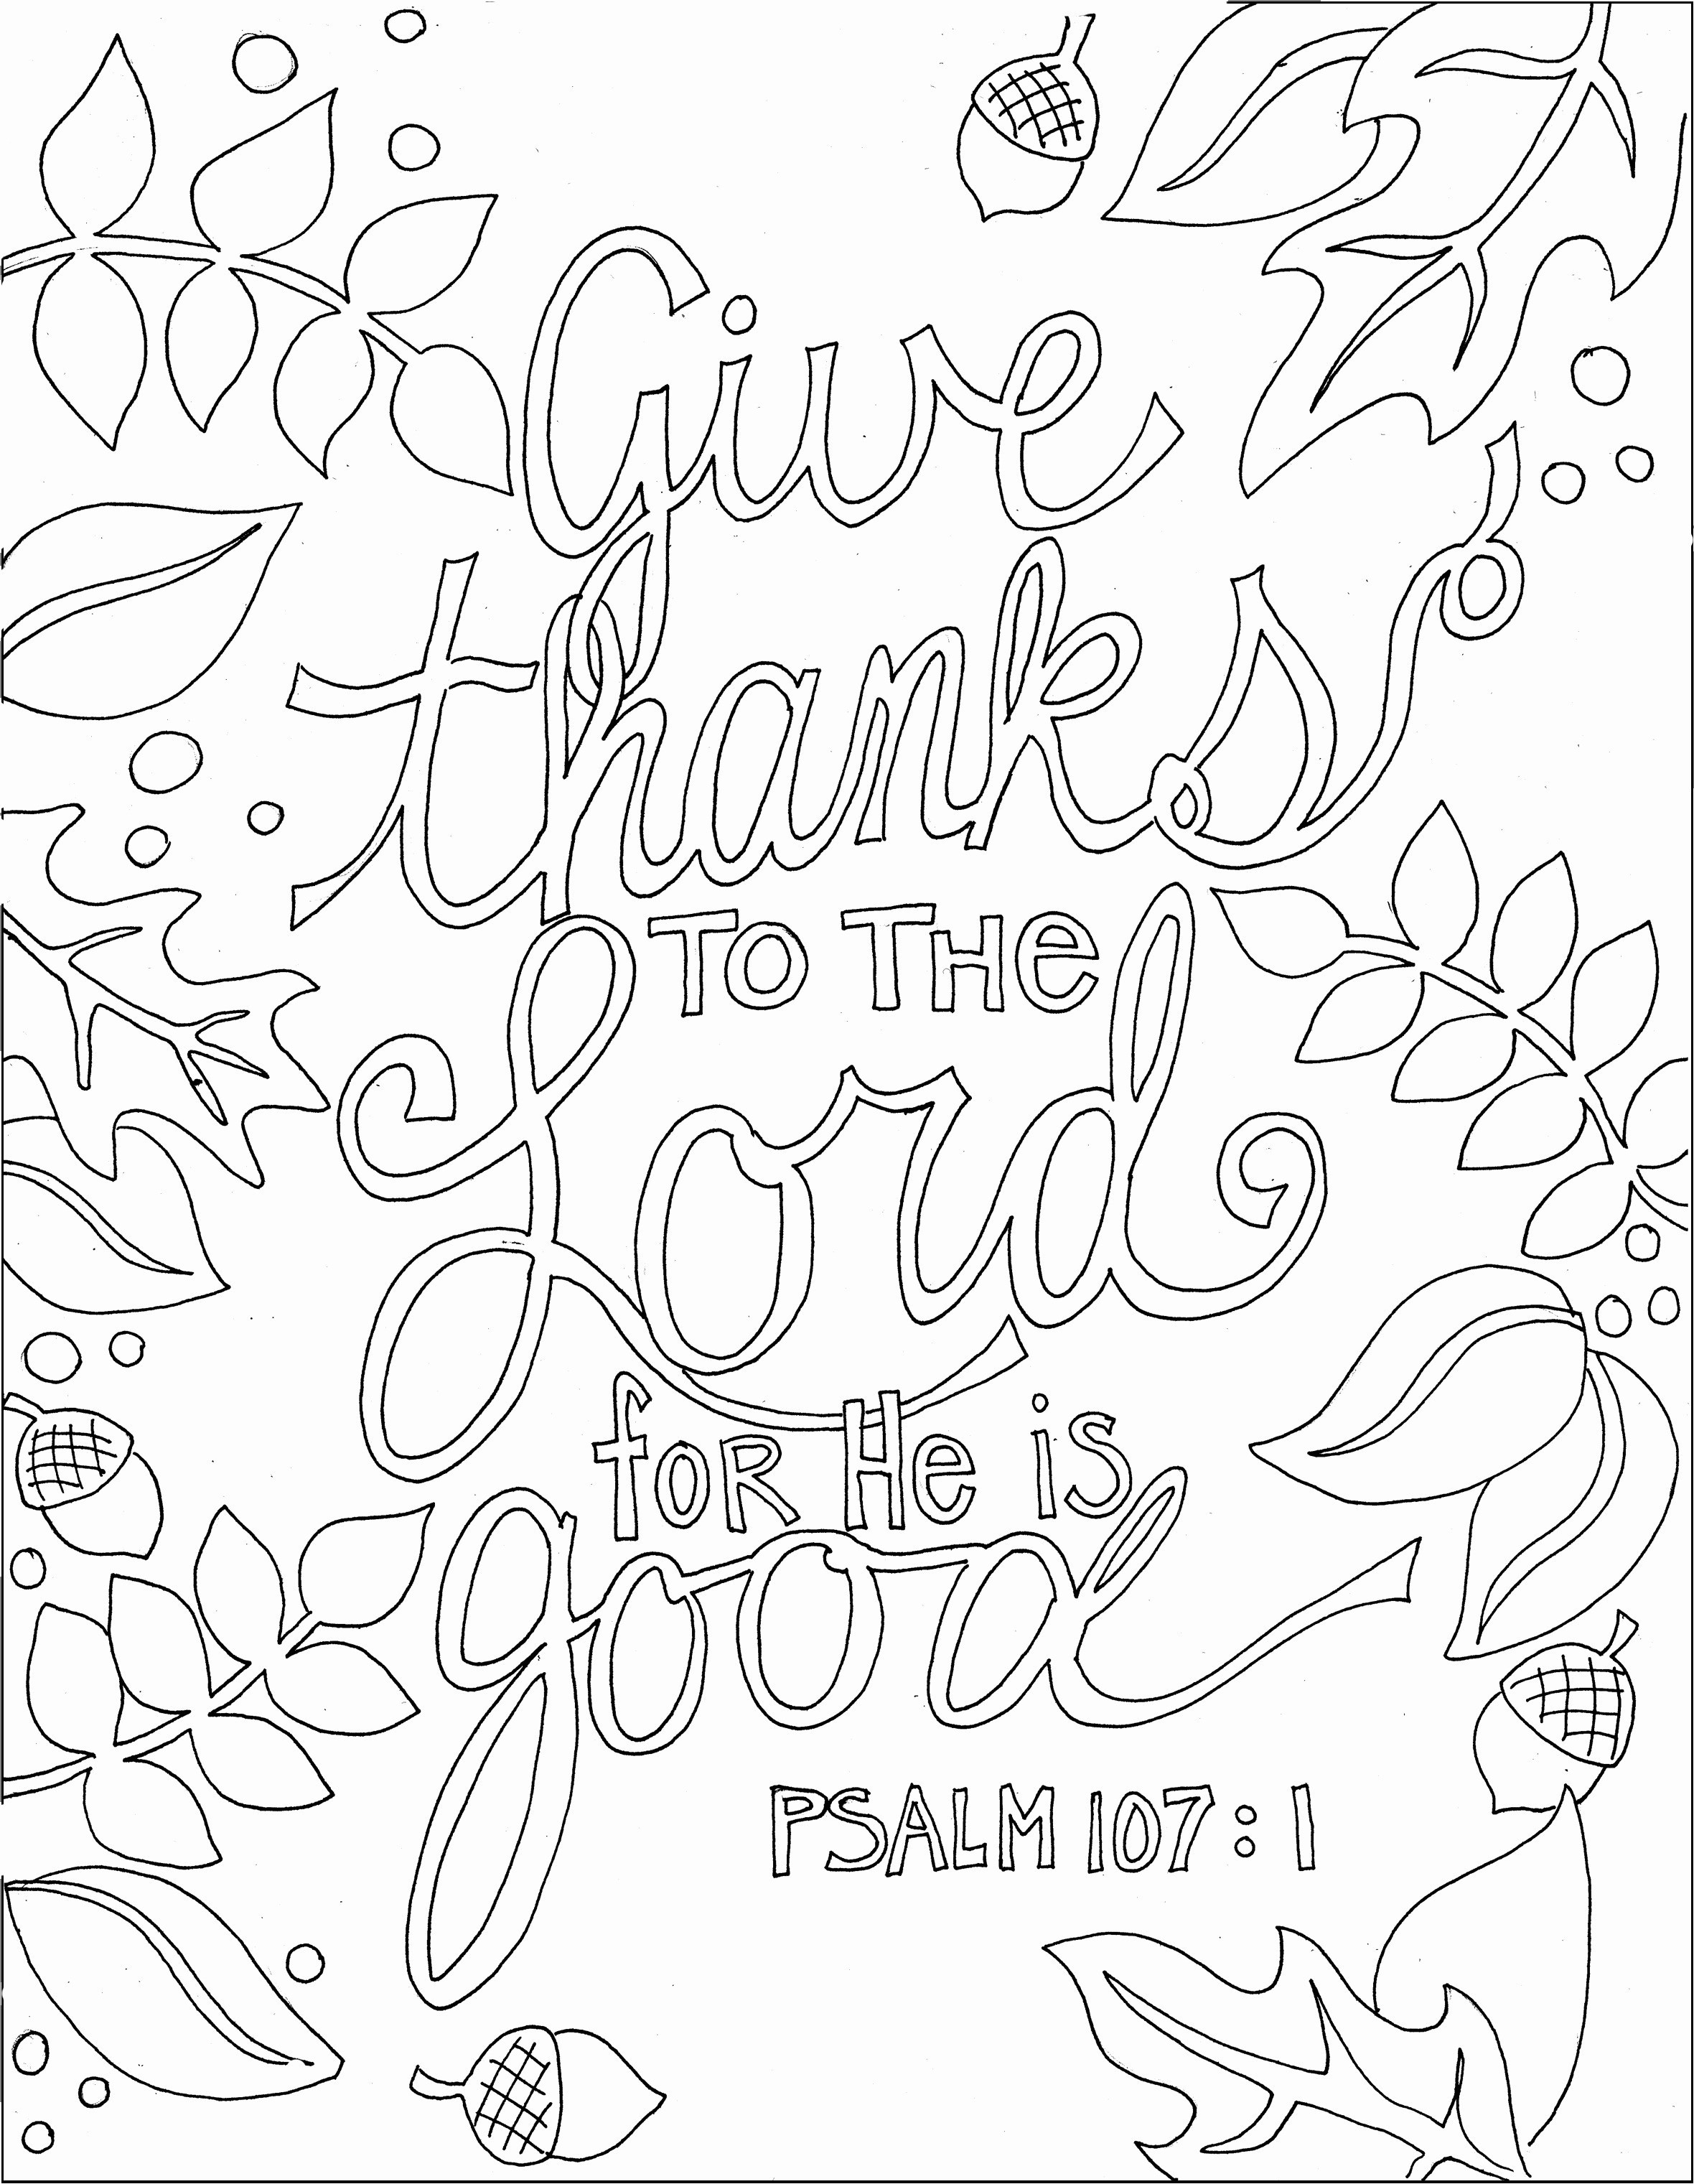 Coloring Pages Bible Stories Free Unique Bible Verse Coloring Pages - Free Printable Bible Coloring Pages With Verses